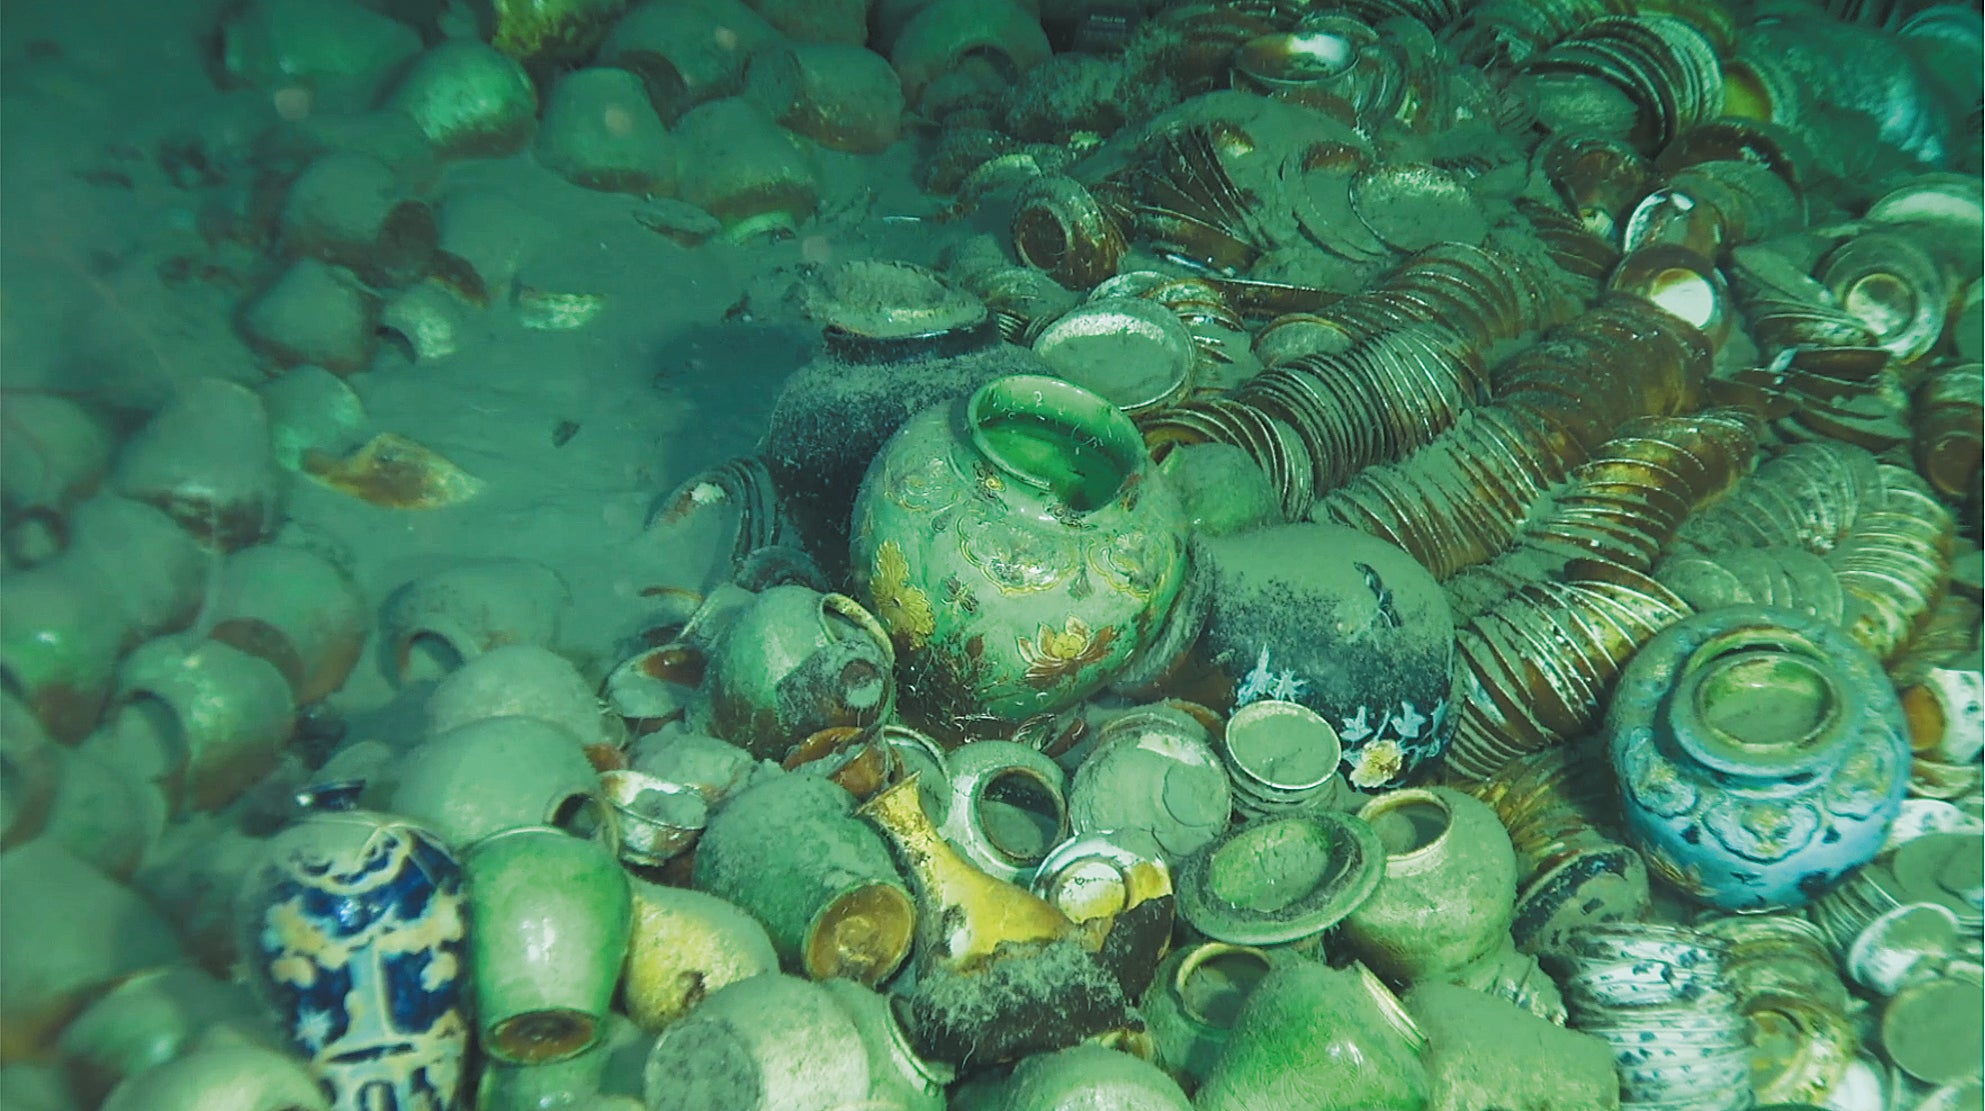 Porcelain relics scattered around one of the shipwrecks in the South China Sea.